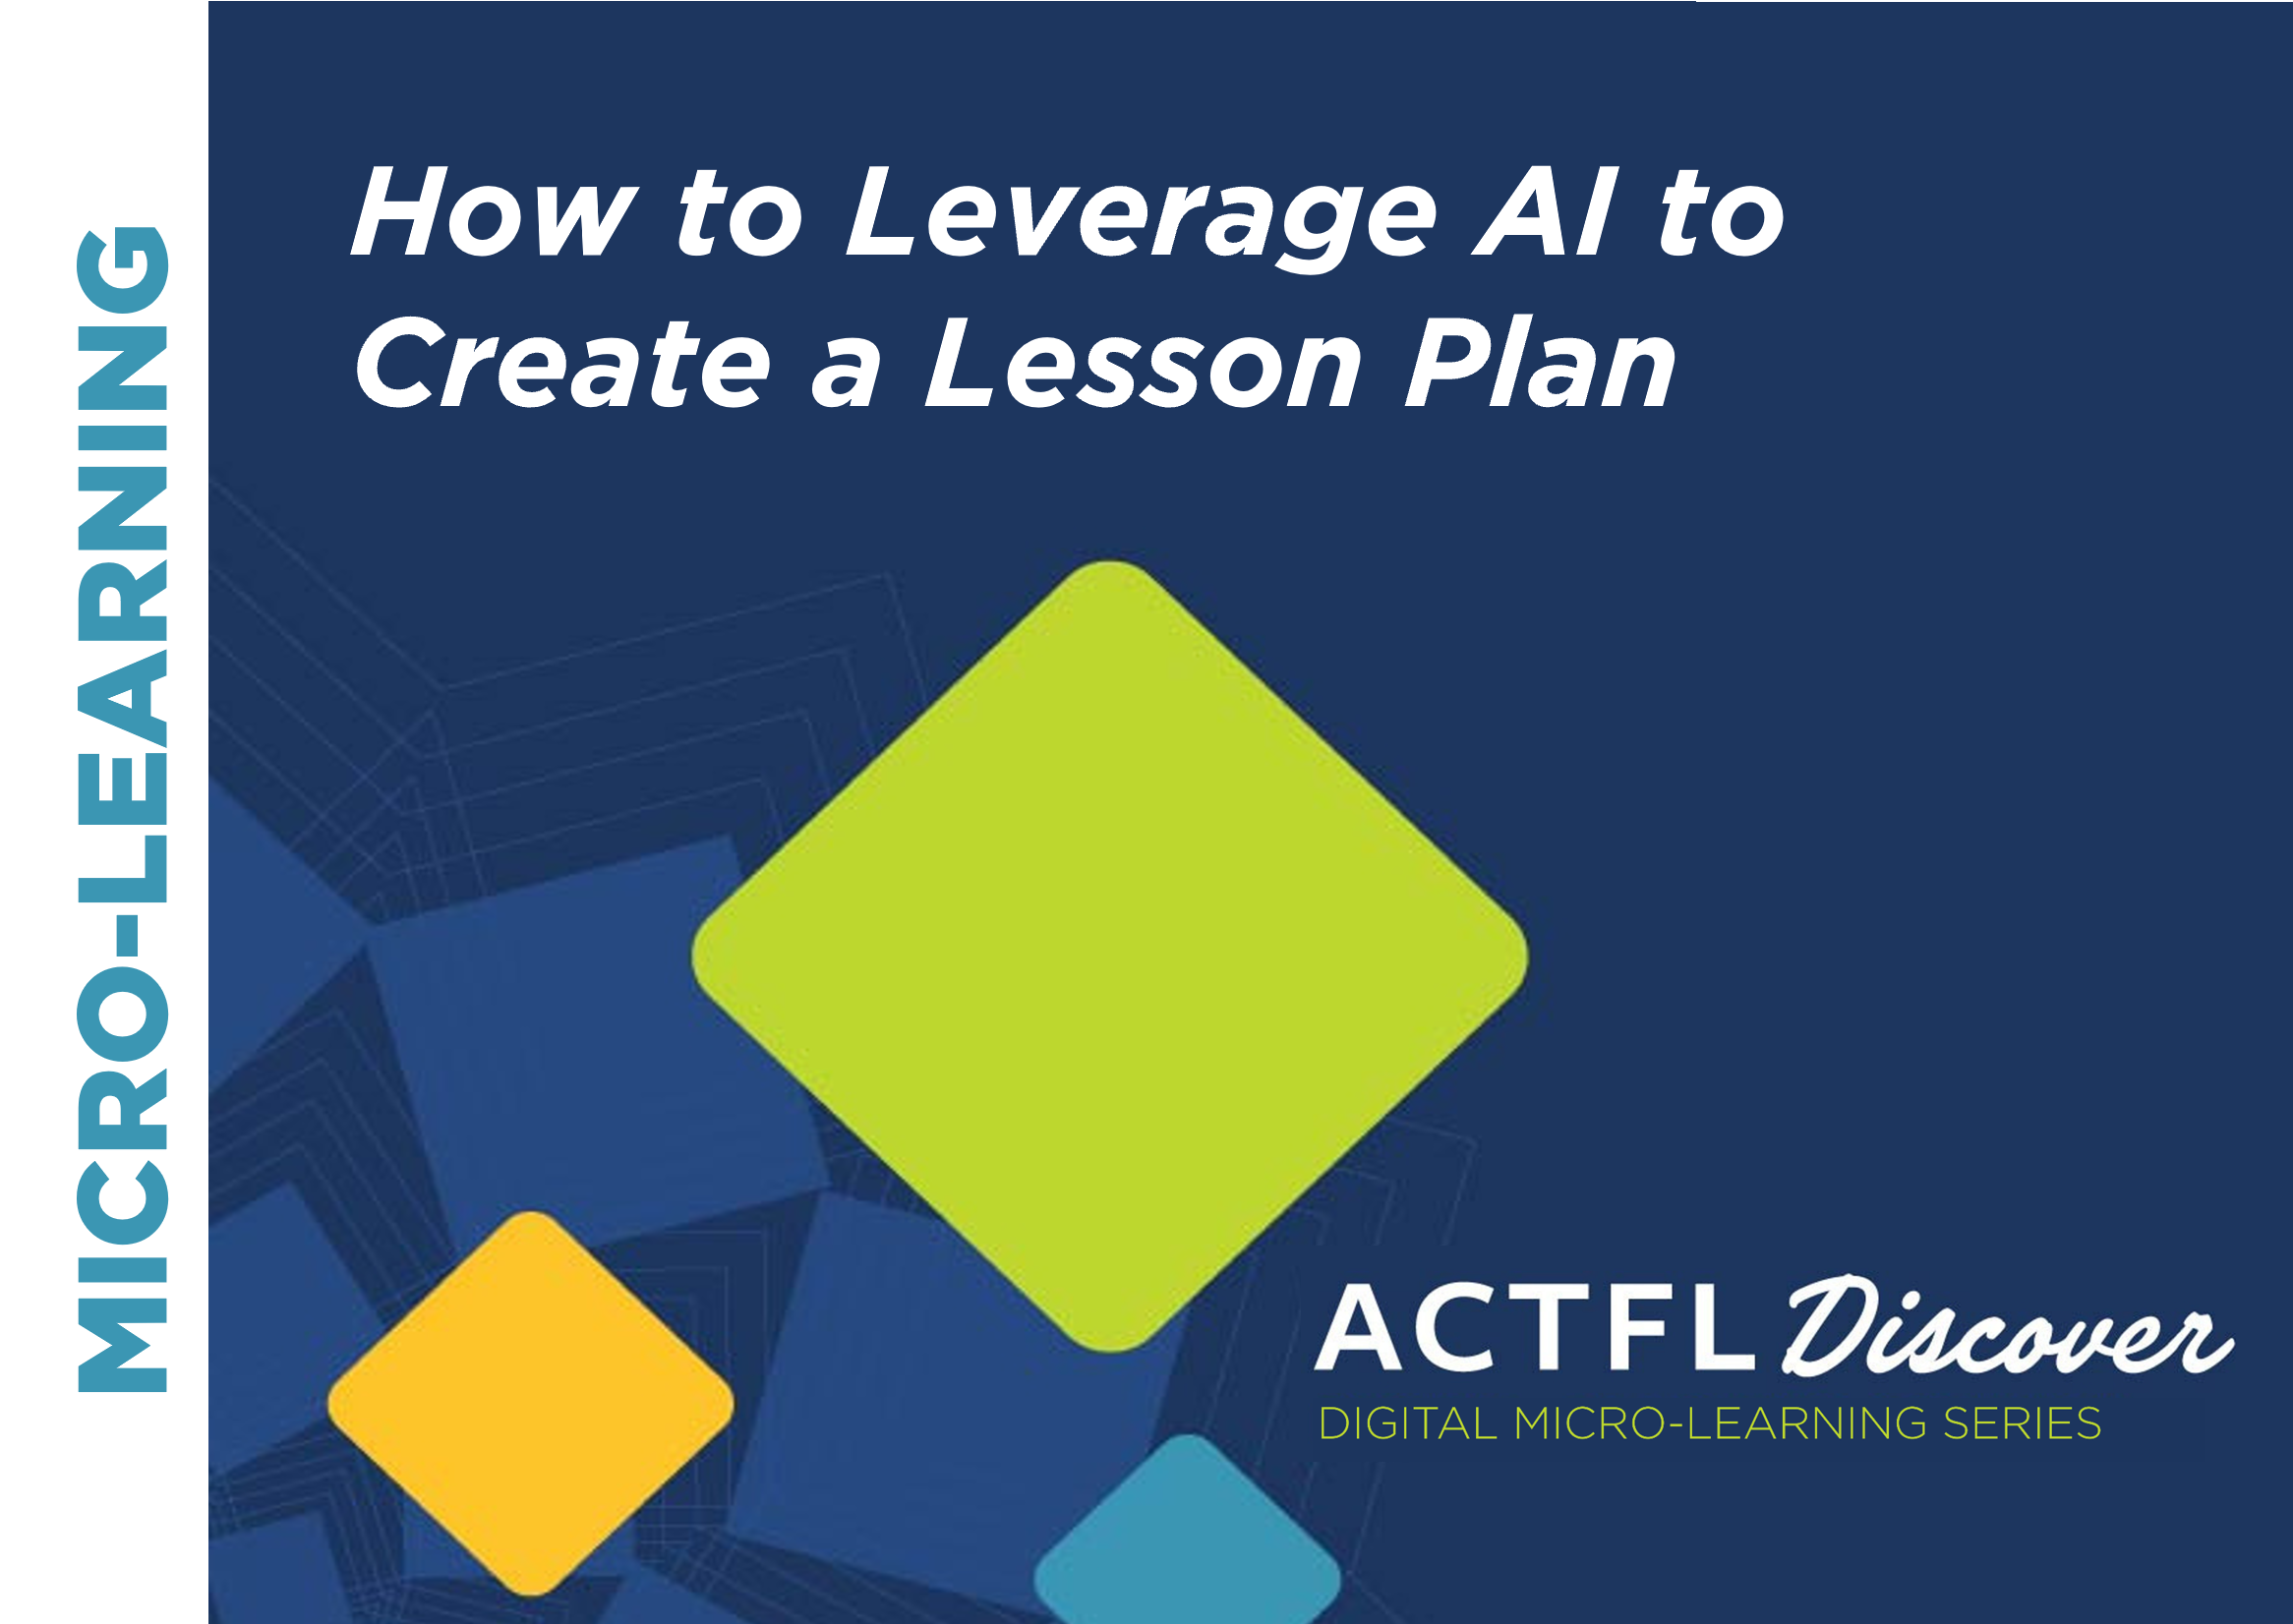 How to Leverage AI to Create a Lesson Plan